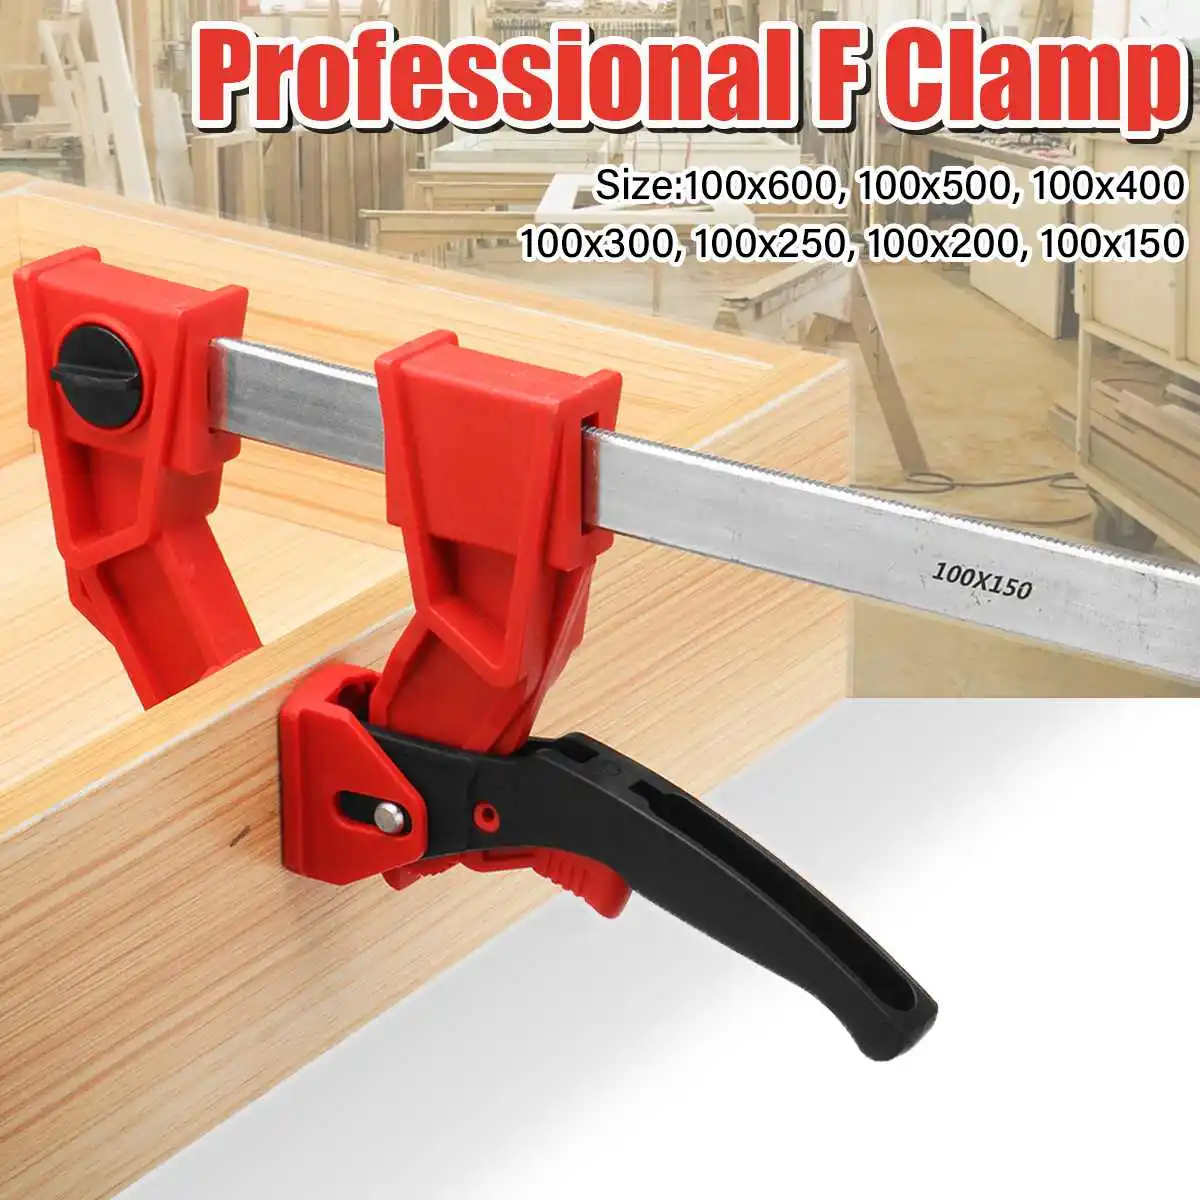 

Heavy Duty F Clamp Quick Ratchet Release Speed Squeeze Adjustable Parallel Clamp Wood Working Carpentry Gadgets Hand DIY Tools